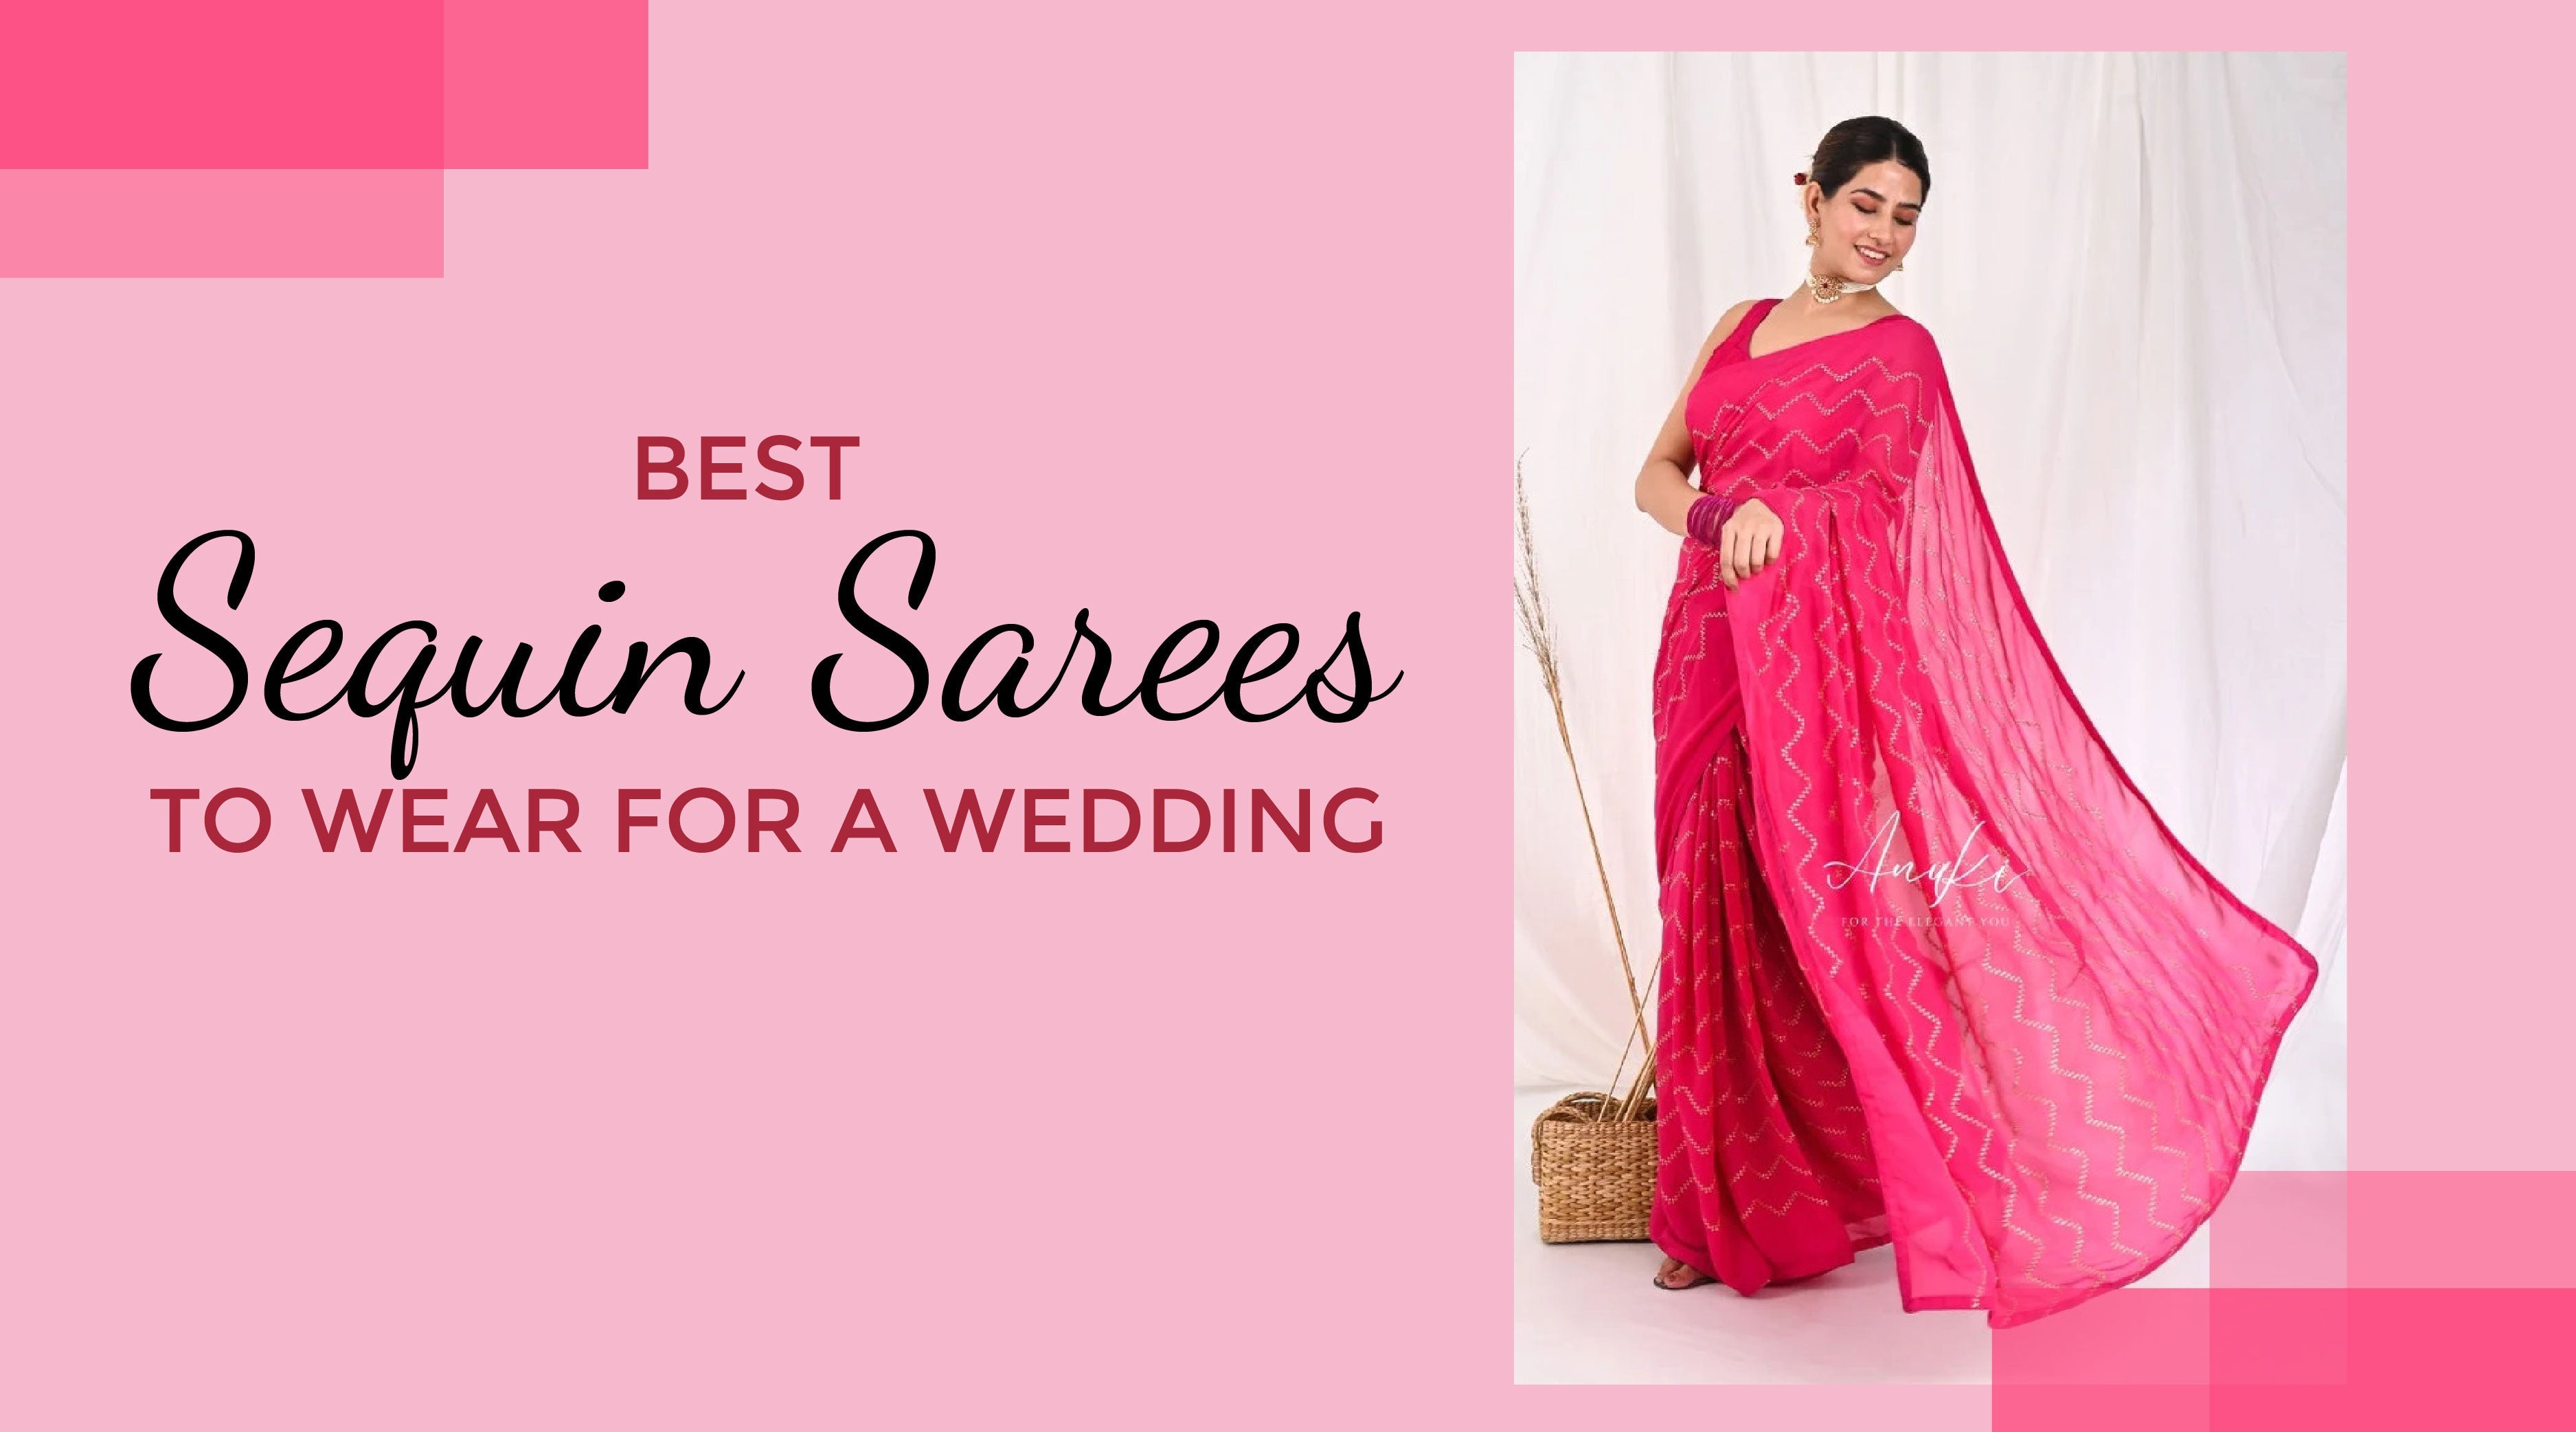 Best Indian Wedding Saree Styles for Skinny Girls